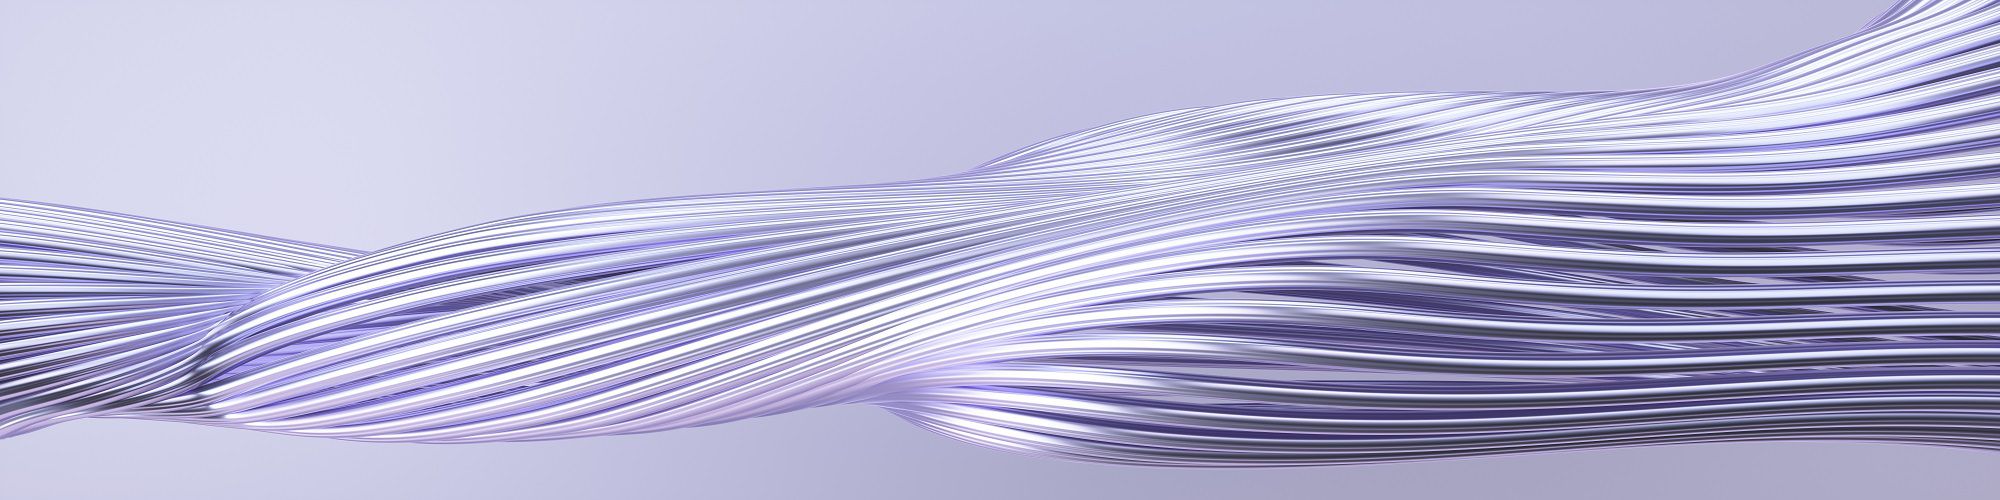 Abstract 3d background banner